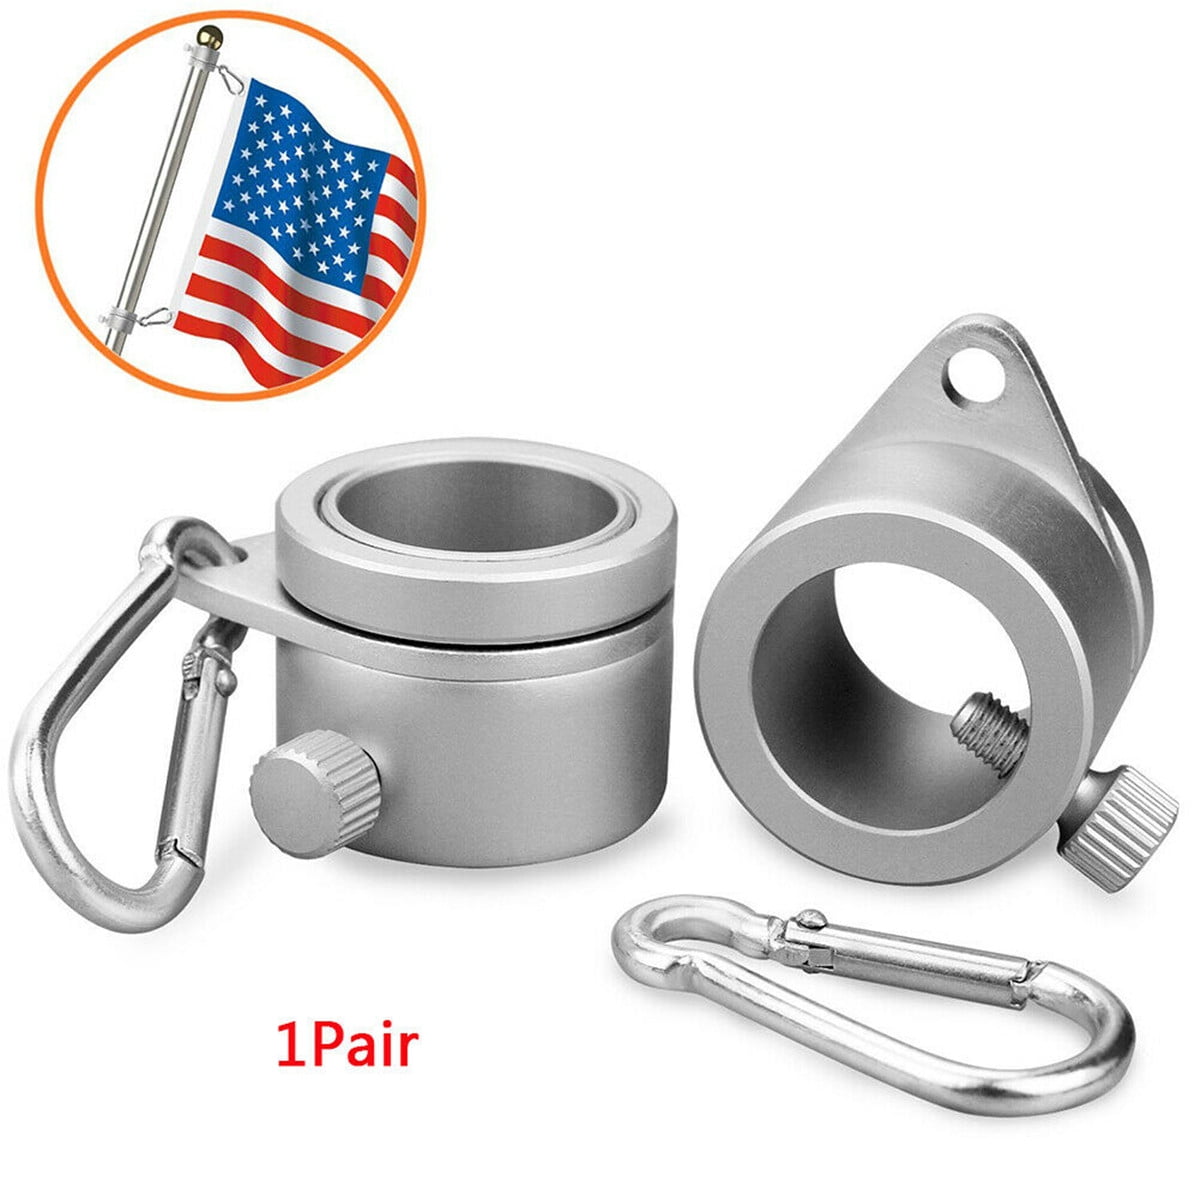 1 Pair White Rotating Flag Mounting Rings Fits 22mm Diameter Flagpole with Iron Screws